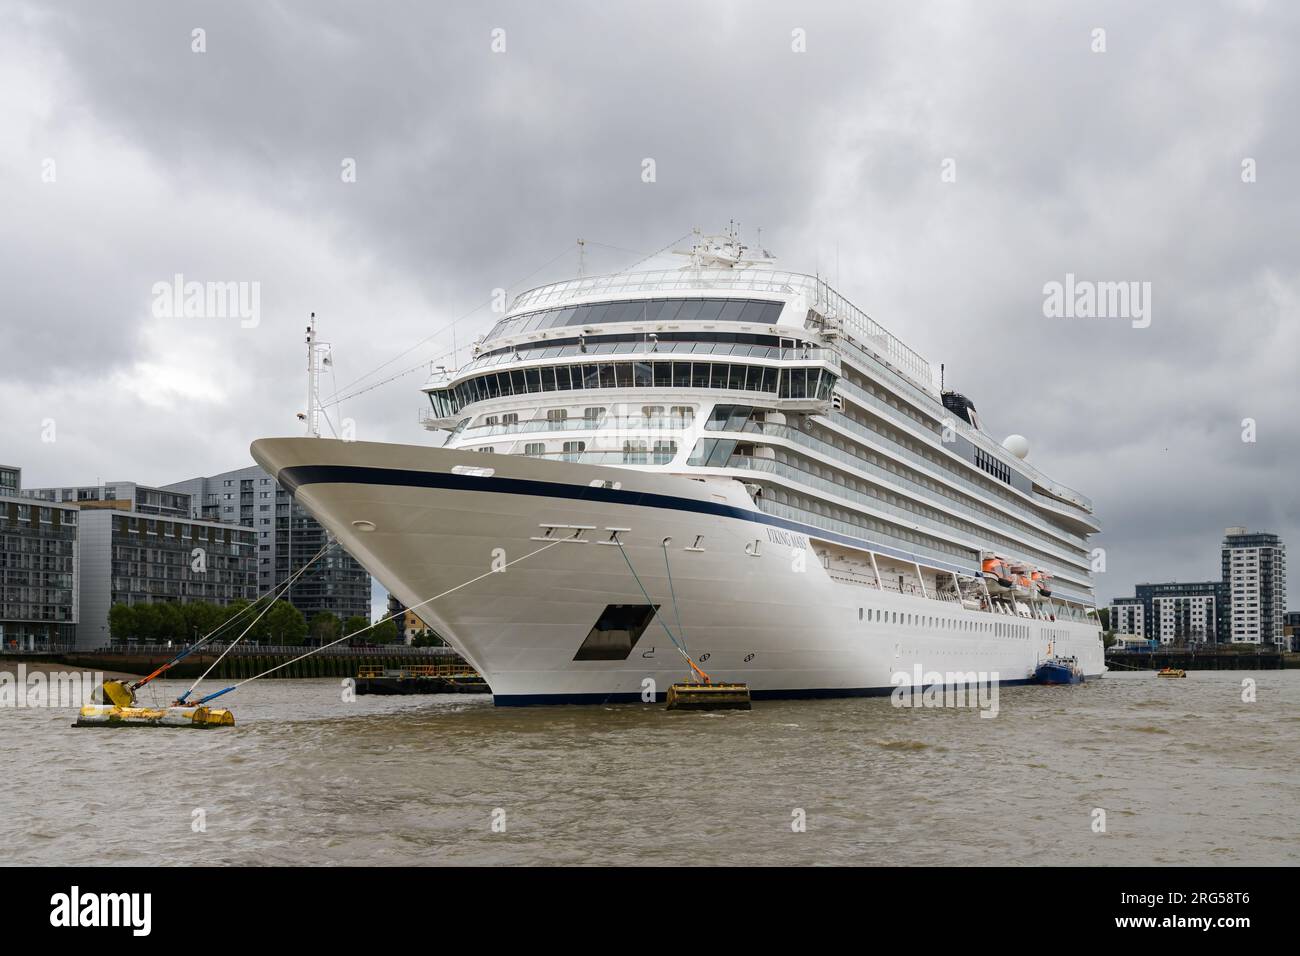 London, UK - July 29, 2023; Viking Mars cruise ship moored under stormy sky on River Thames in London Stock Photo